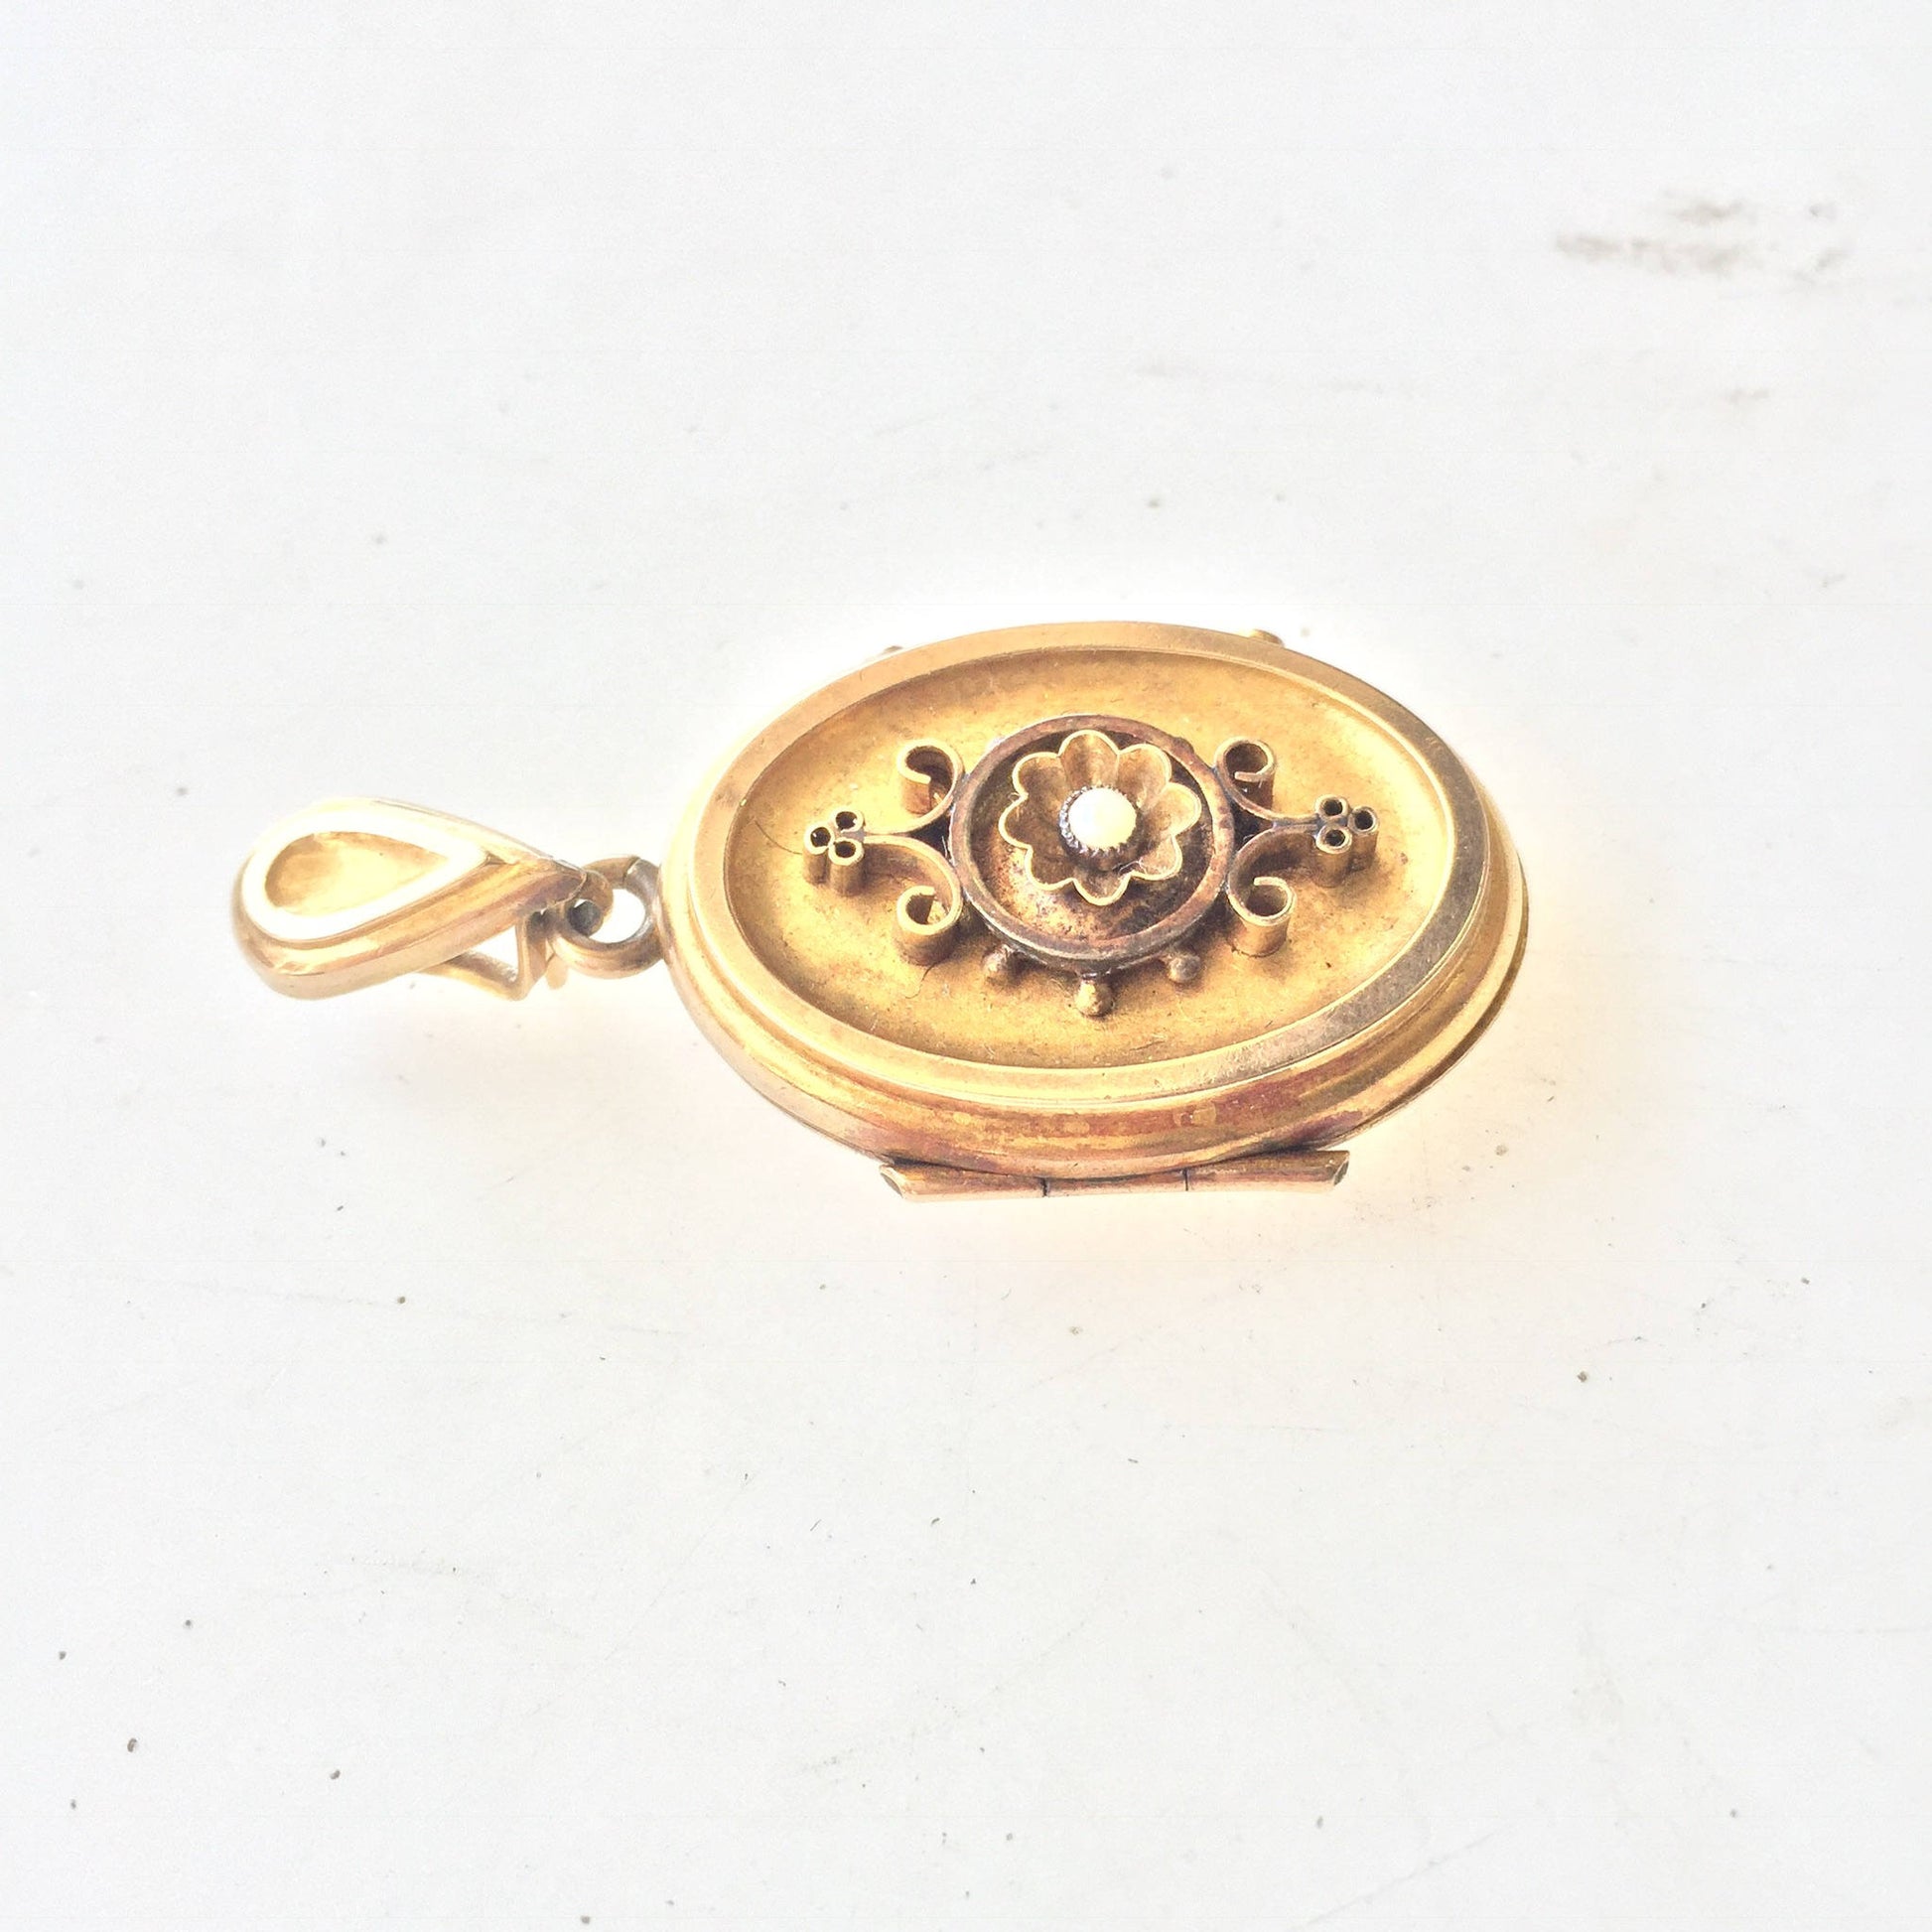 Antique 10 karat gold oval Victorian locket charm pendant necklace with floral design and green enamel accents, a keepsake jewelry gift for her.